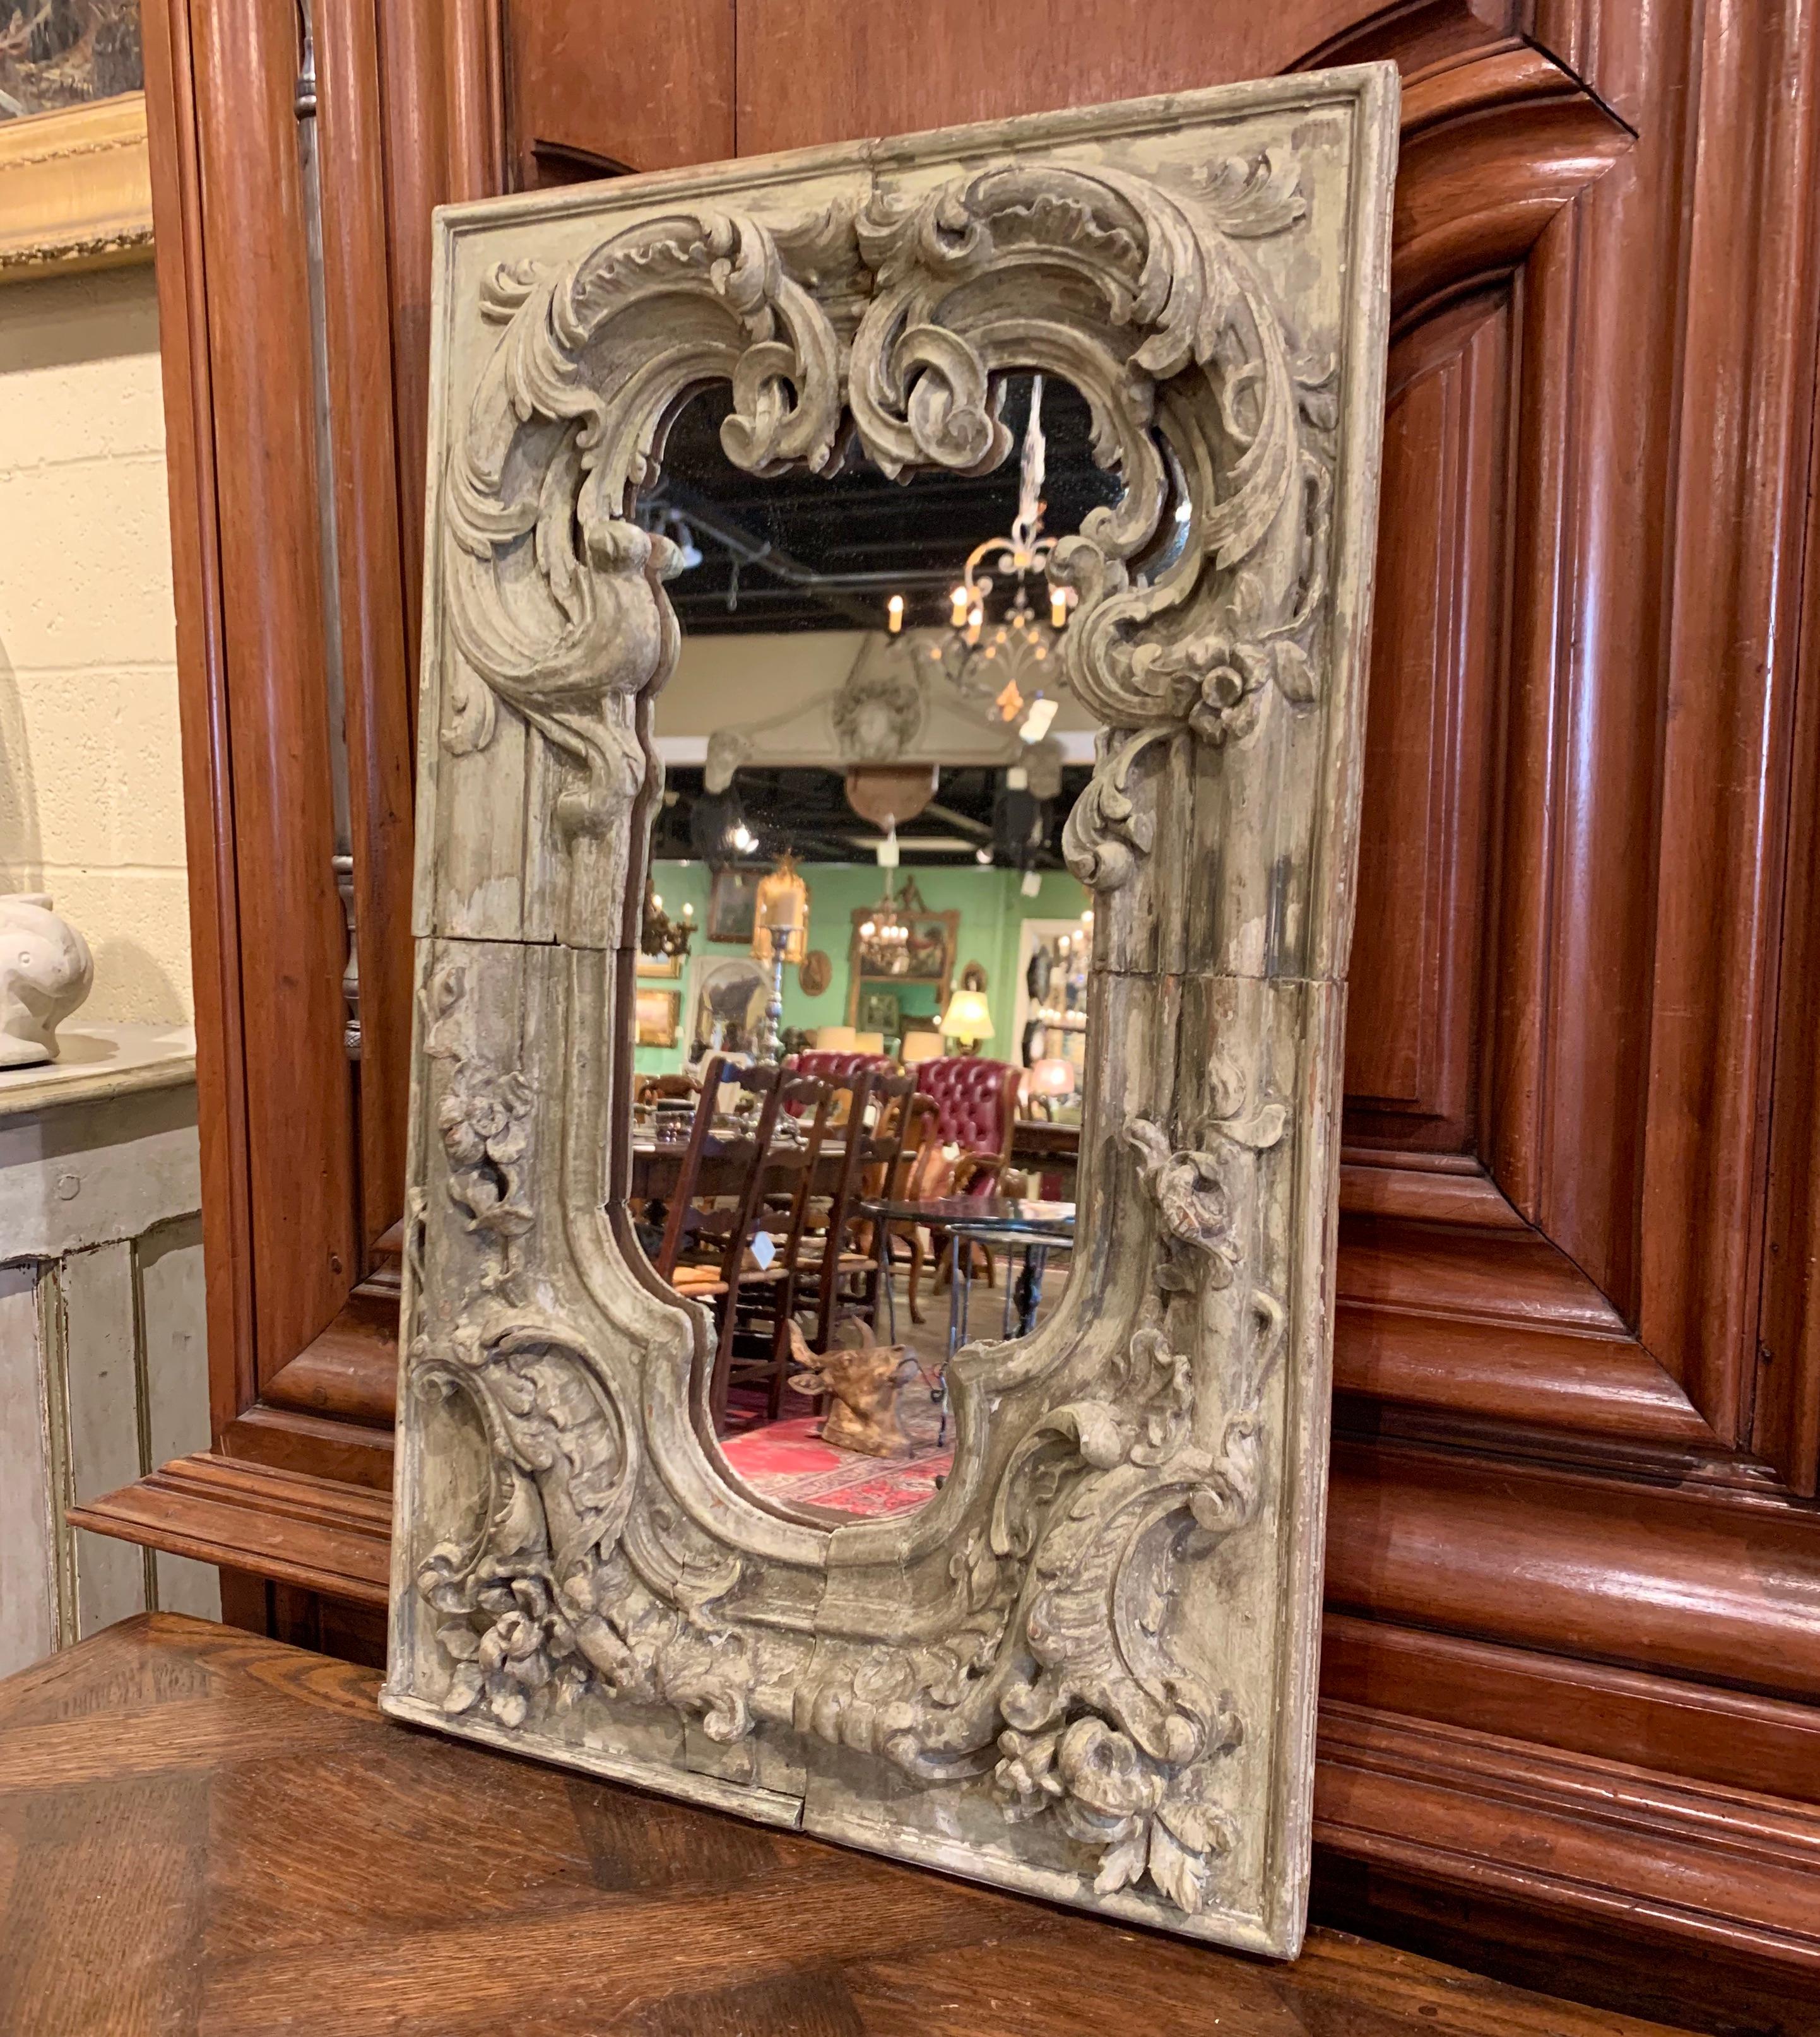 Hand carved in oak with old elements circa 1780, the rectangular frame features scrolled decor embellished with acanthus leaf and floral motifs in high relief. The mirror is in very good condition commensurate with age and use and adorns the